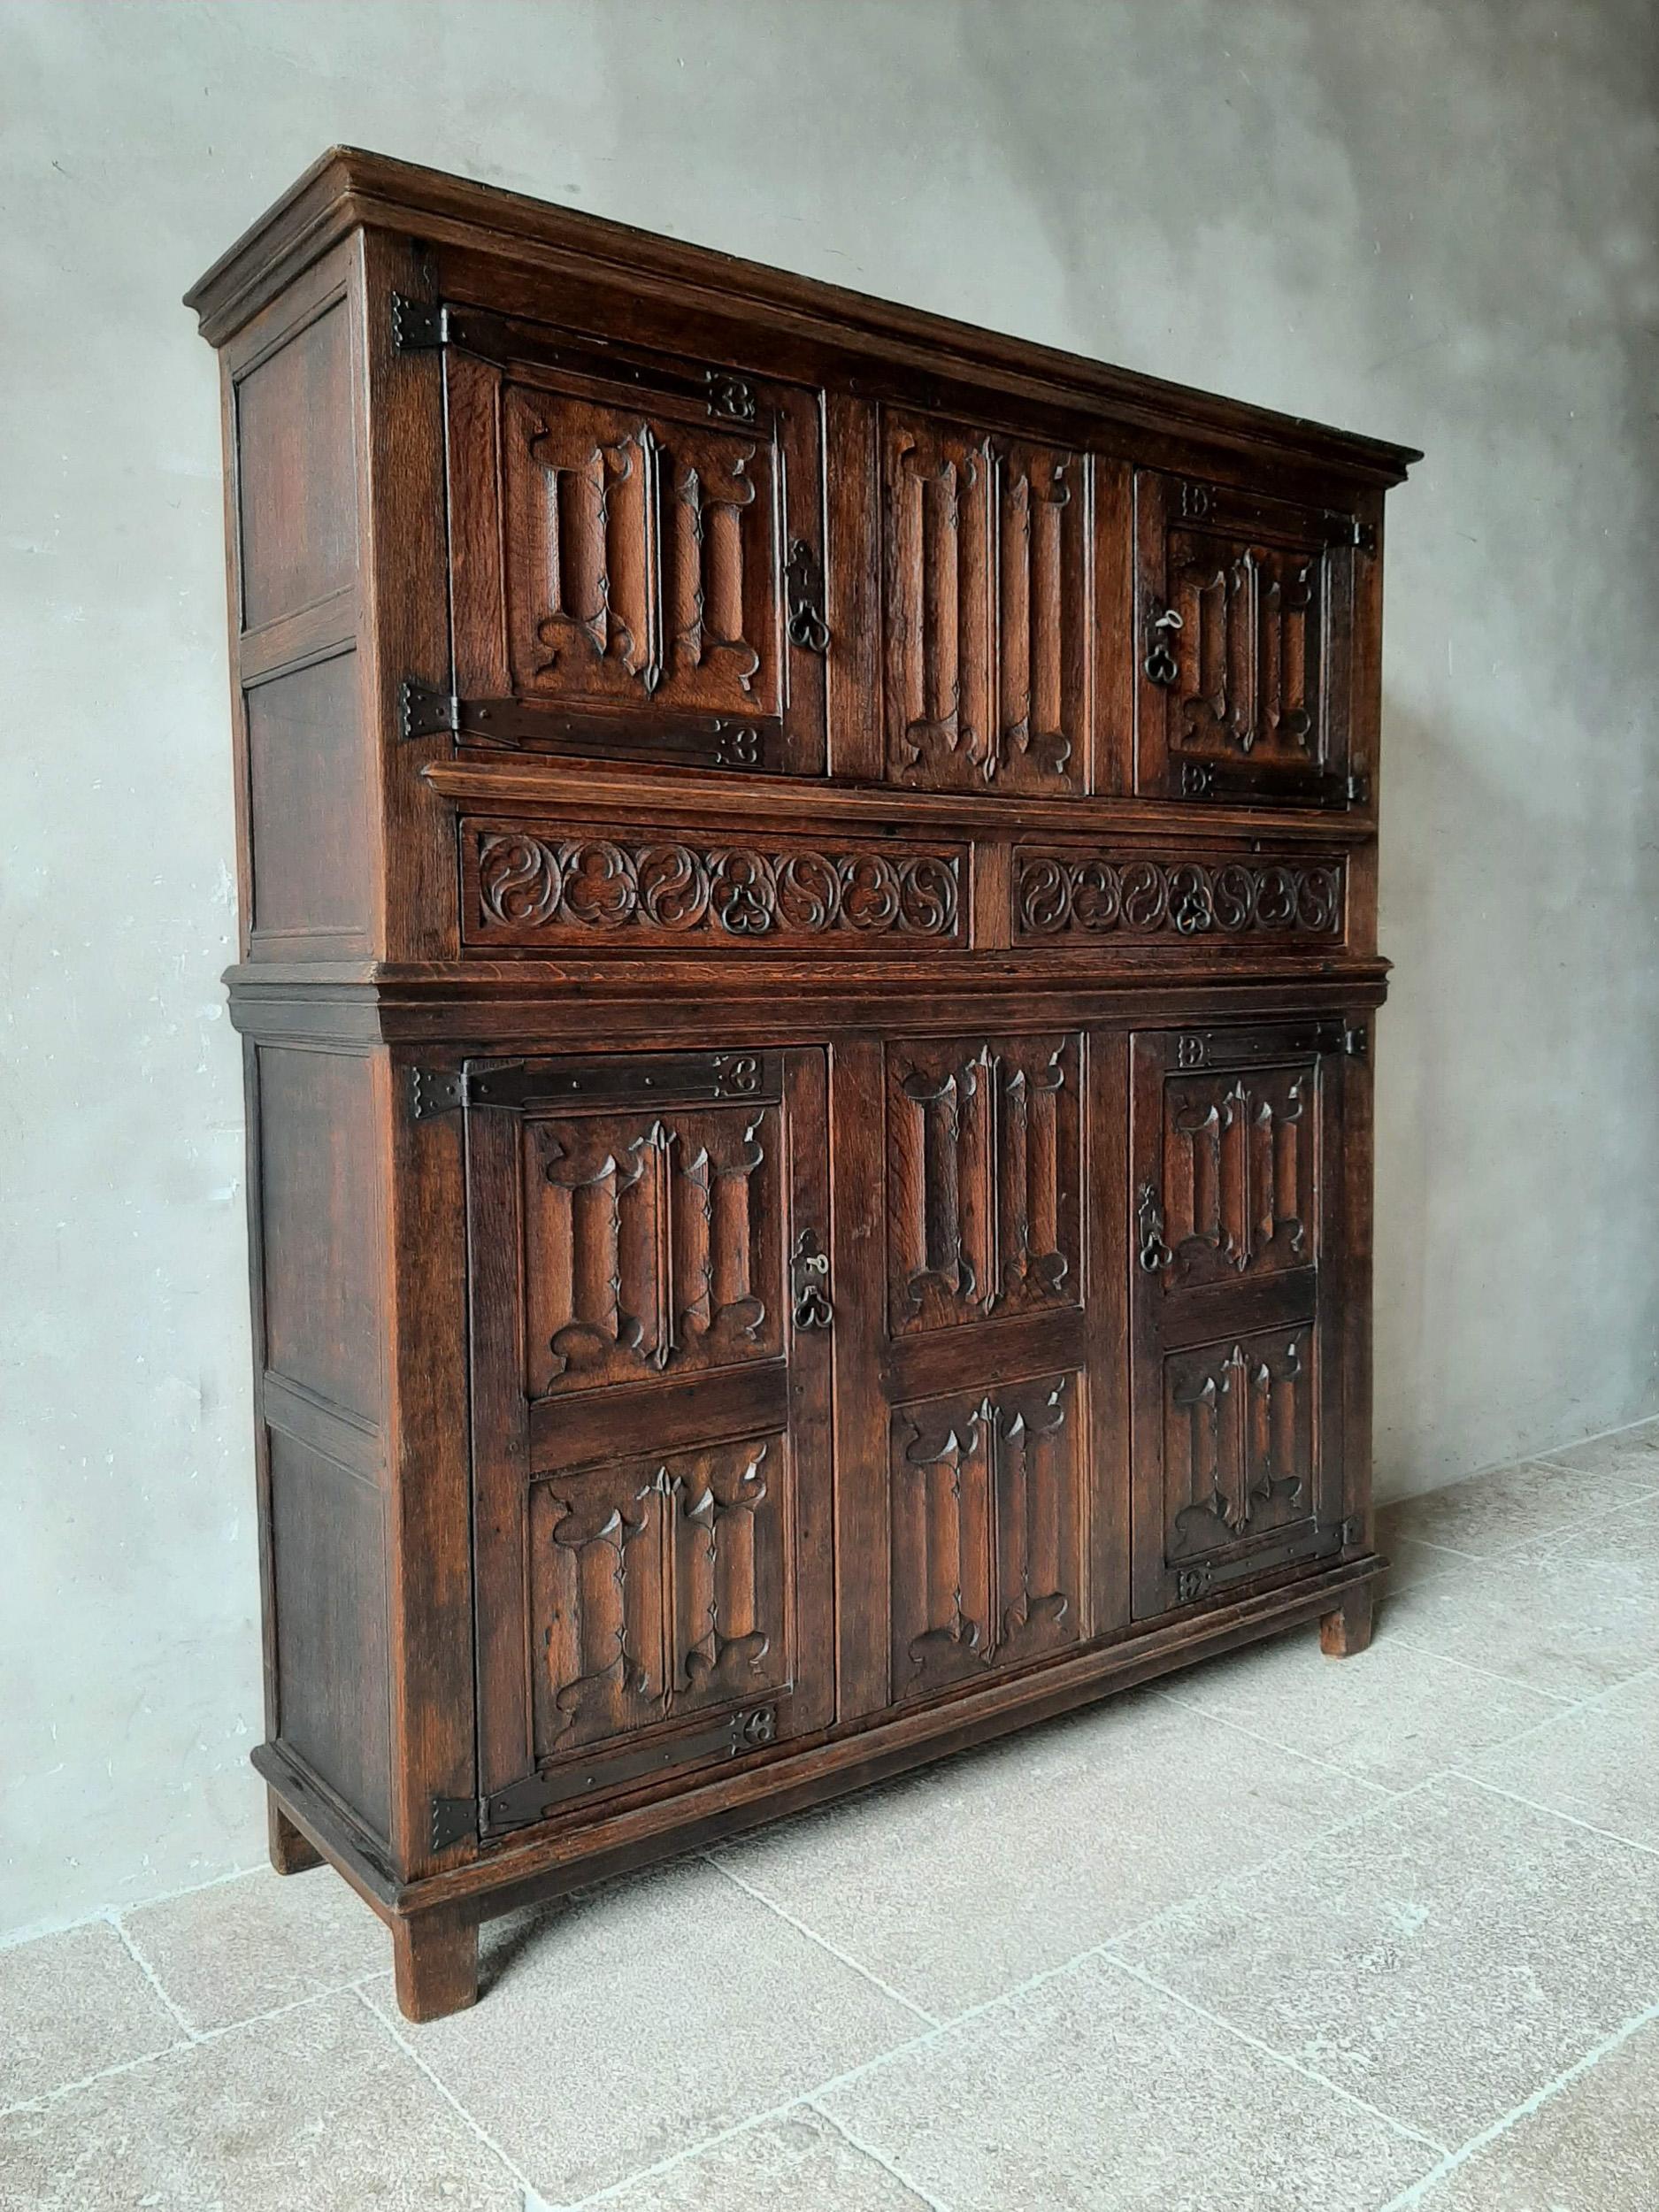 20th Century Amazing Gothic Revival High Credenza with Hand Carved Church Windows Early 1900s